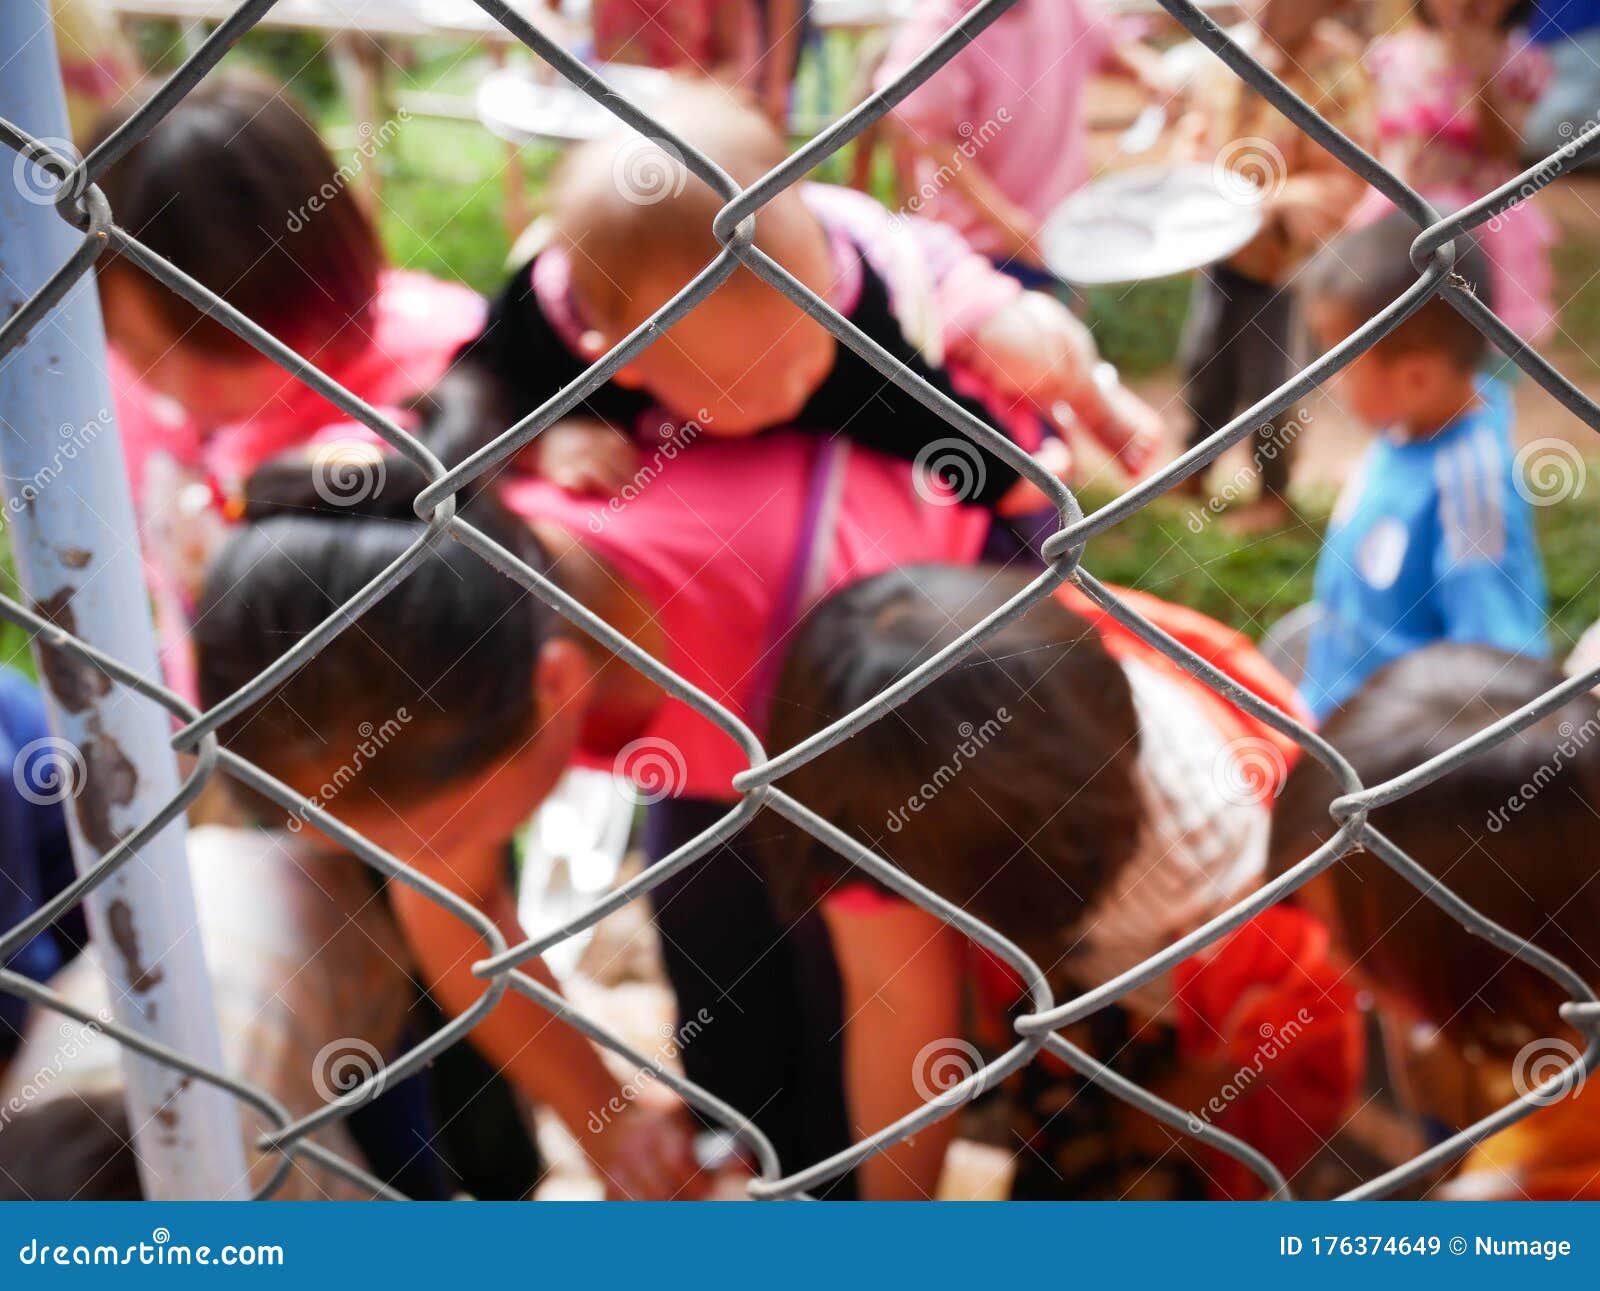 disadvantaged woman and kids behind the fence stock photo